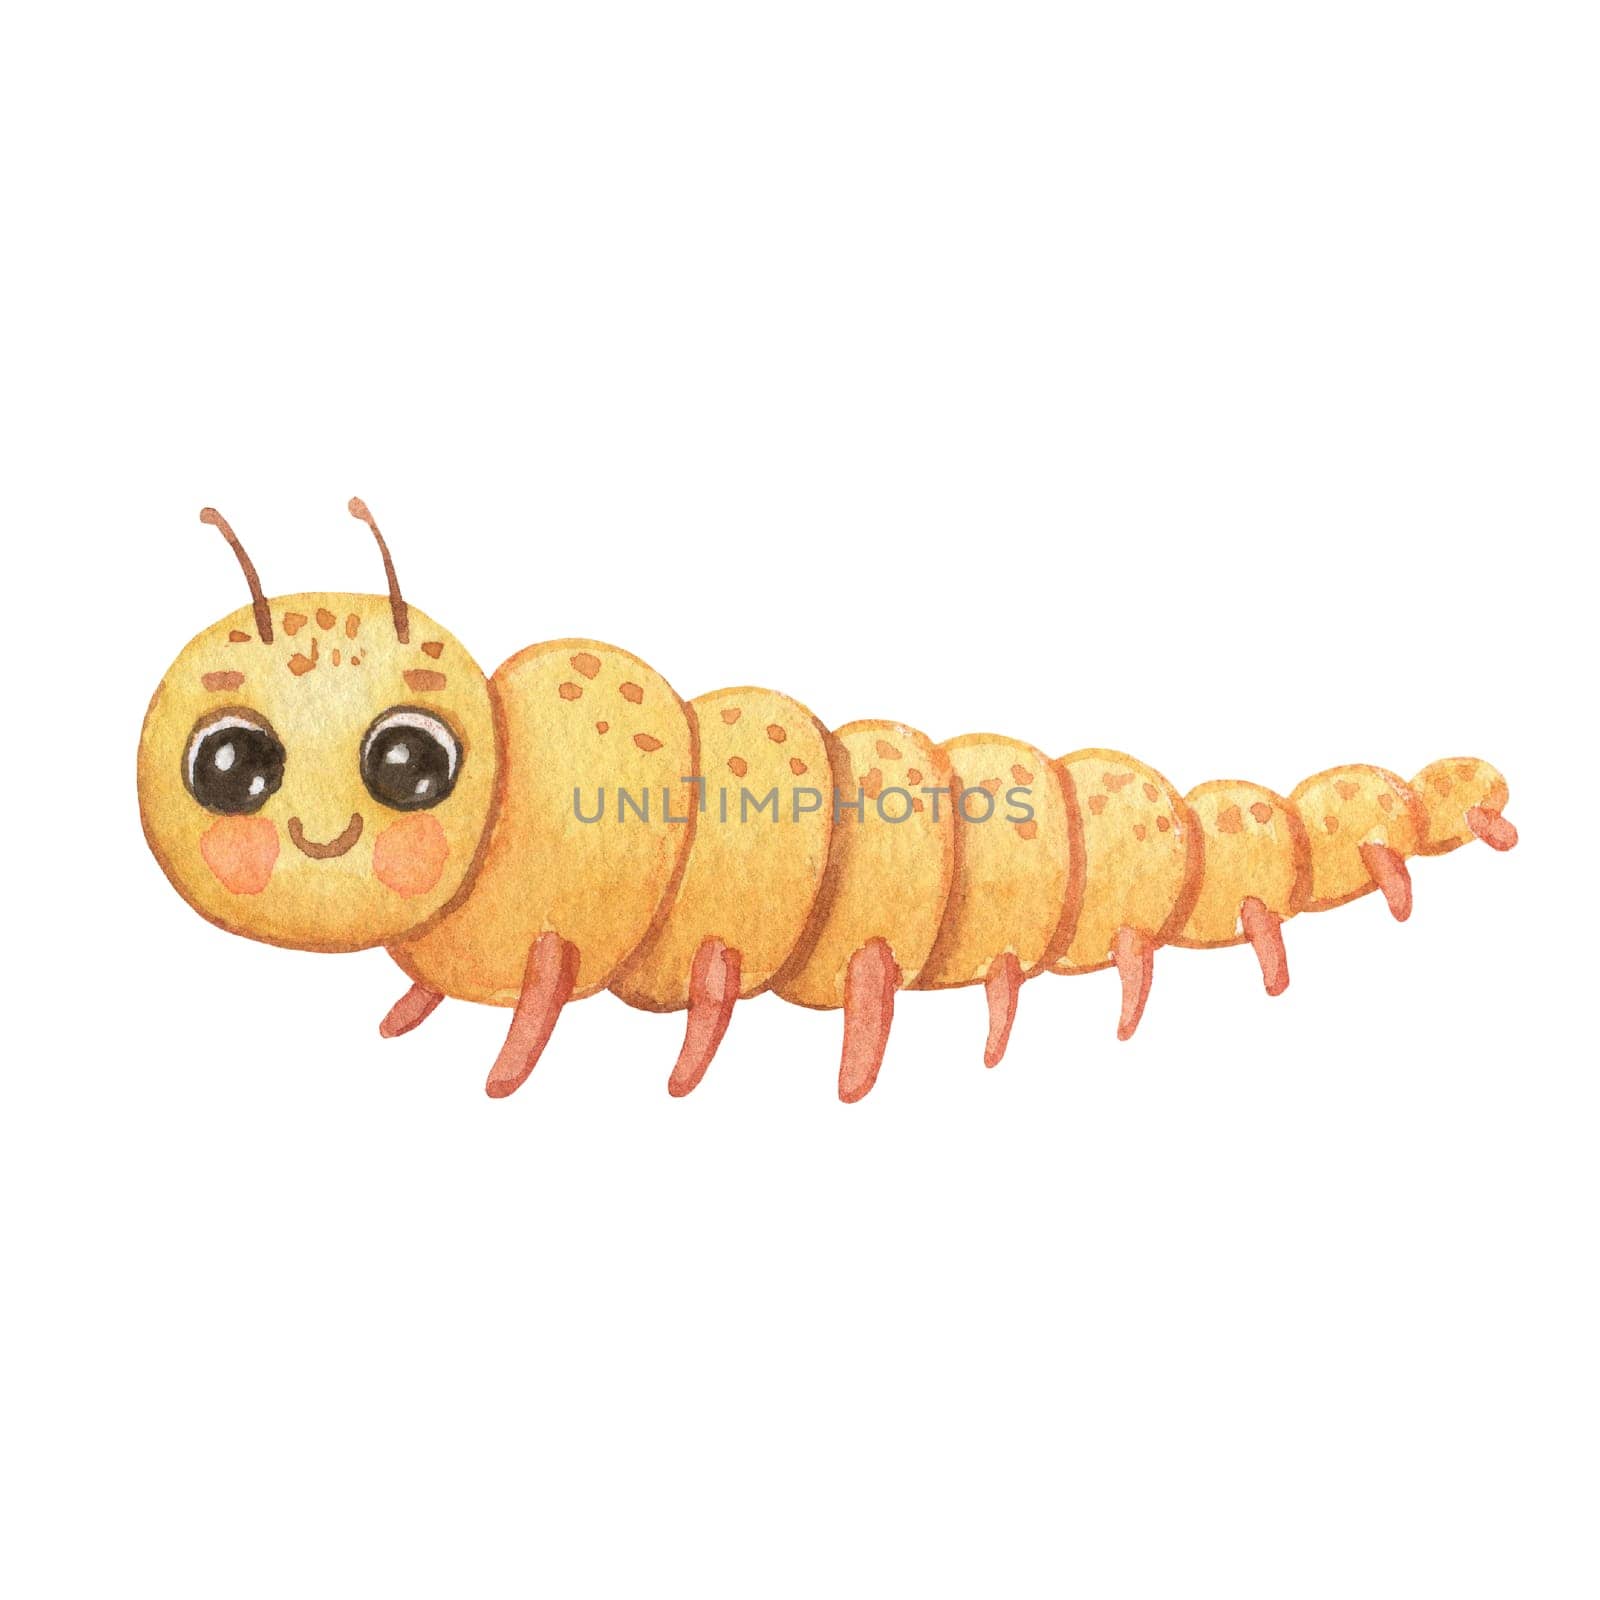 Cute smiling character caterpillar isolated on white background. Funny insect for children. Watercolor cartoon illustration